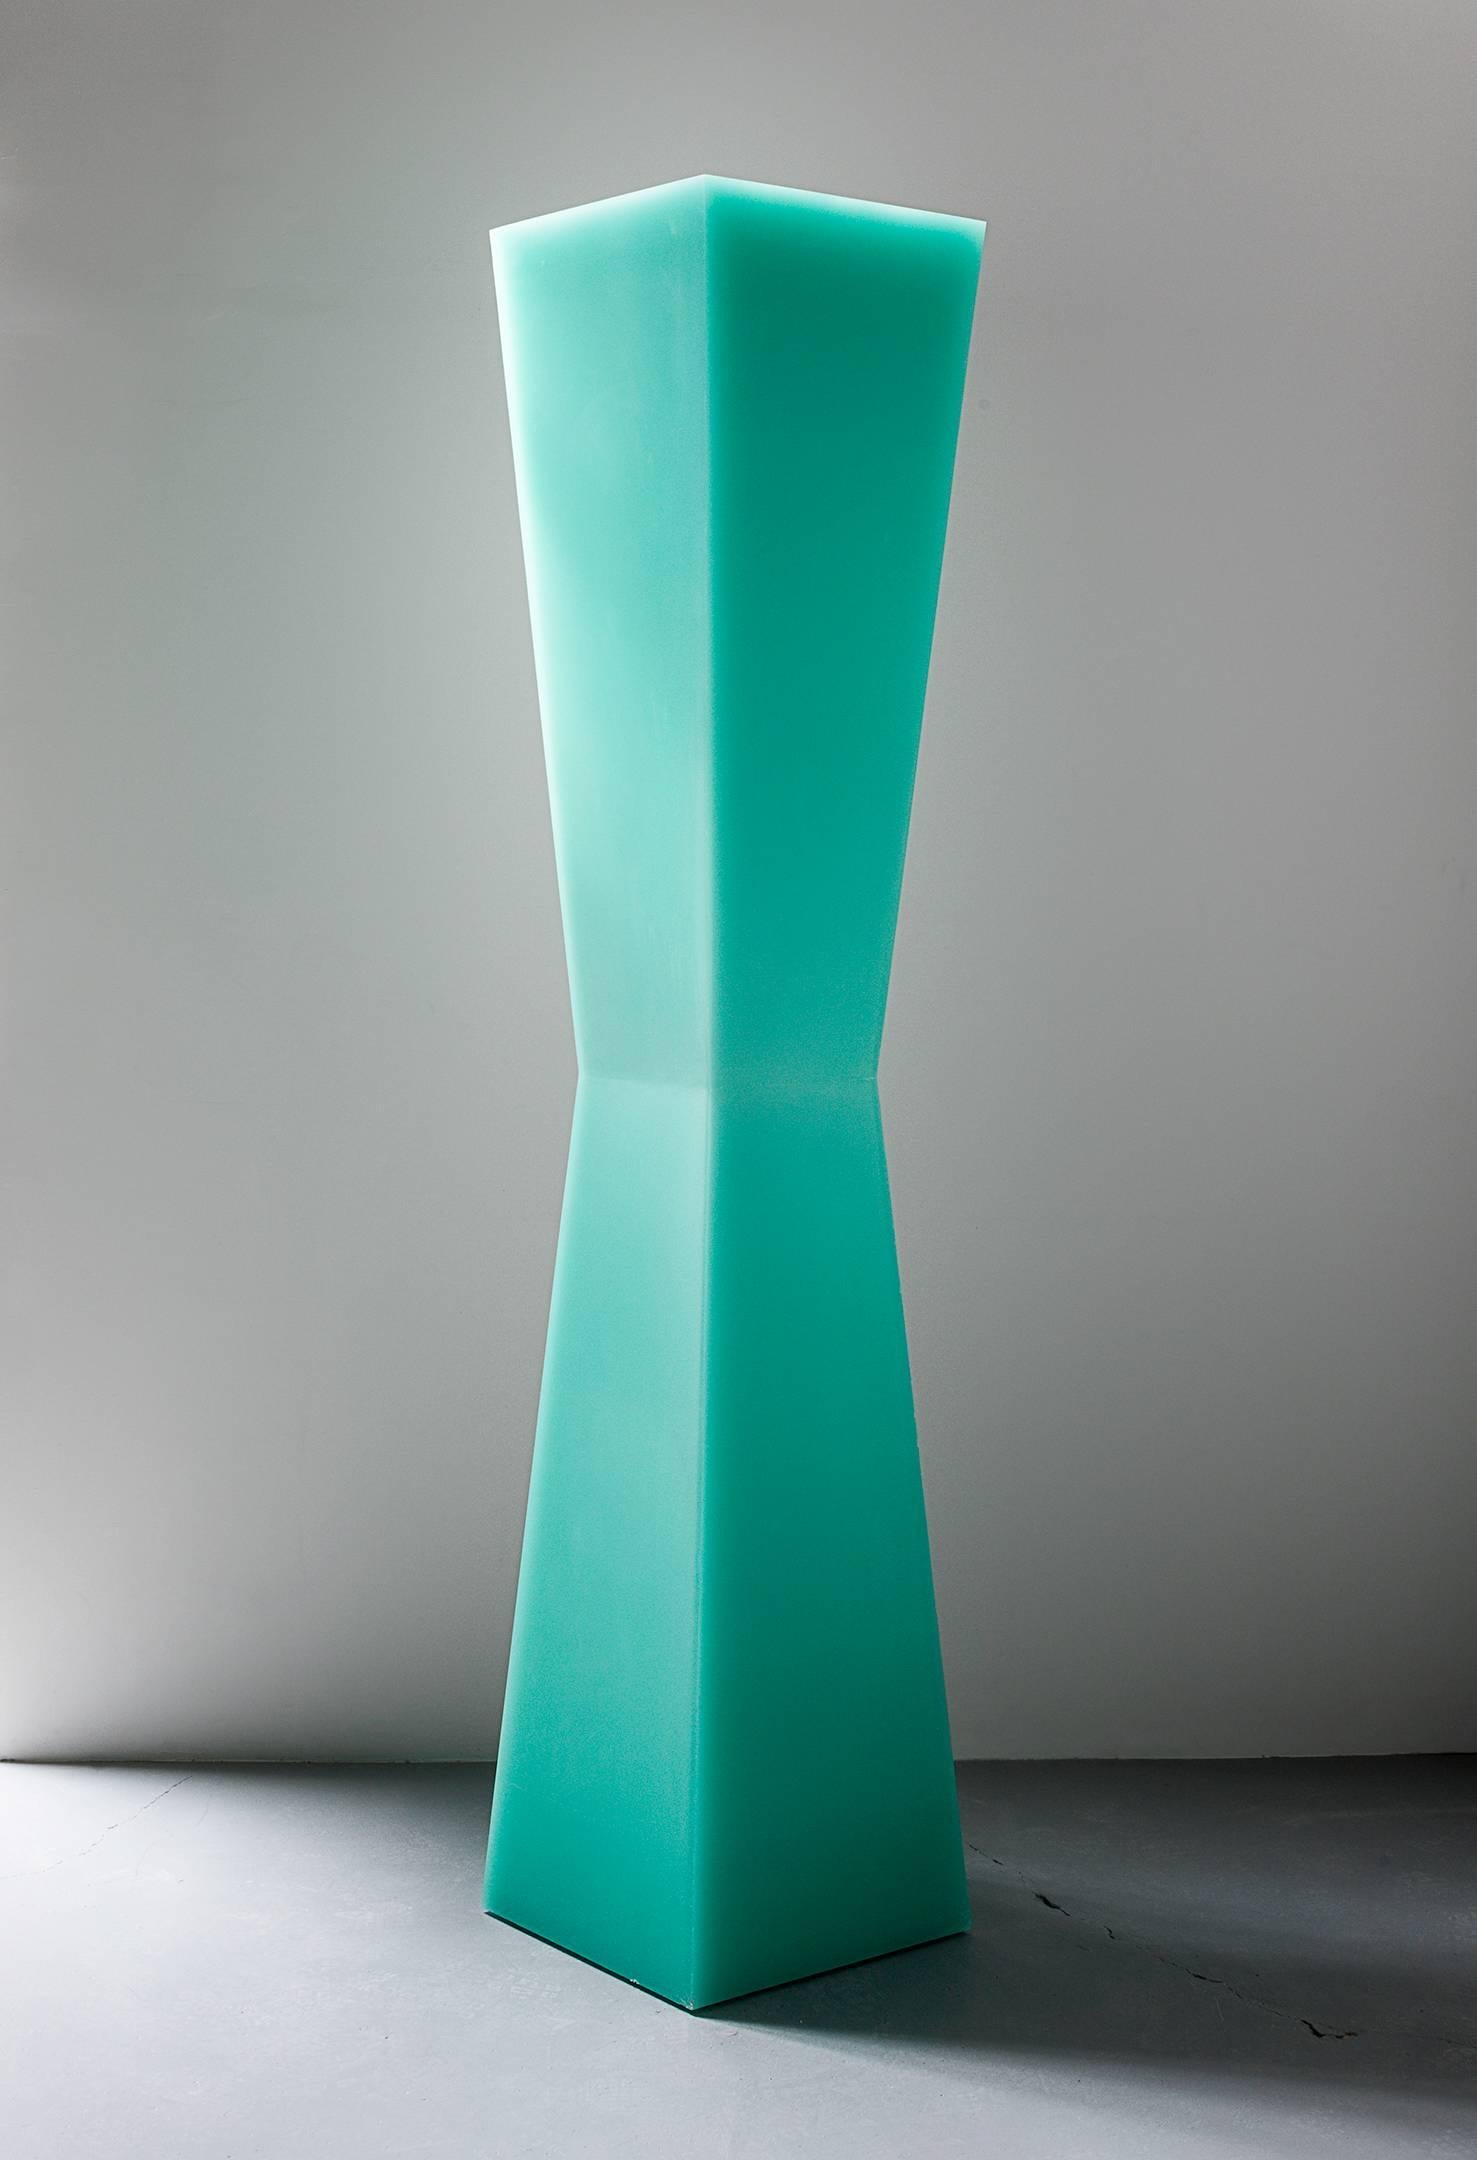 This column uses Facture Studio's shift style to transition seamlessly from a deep opaque to water clear green over a white core. The exterior facets are sanded to a buttery smooth finish. This column plays with light and transparency to create a